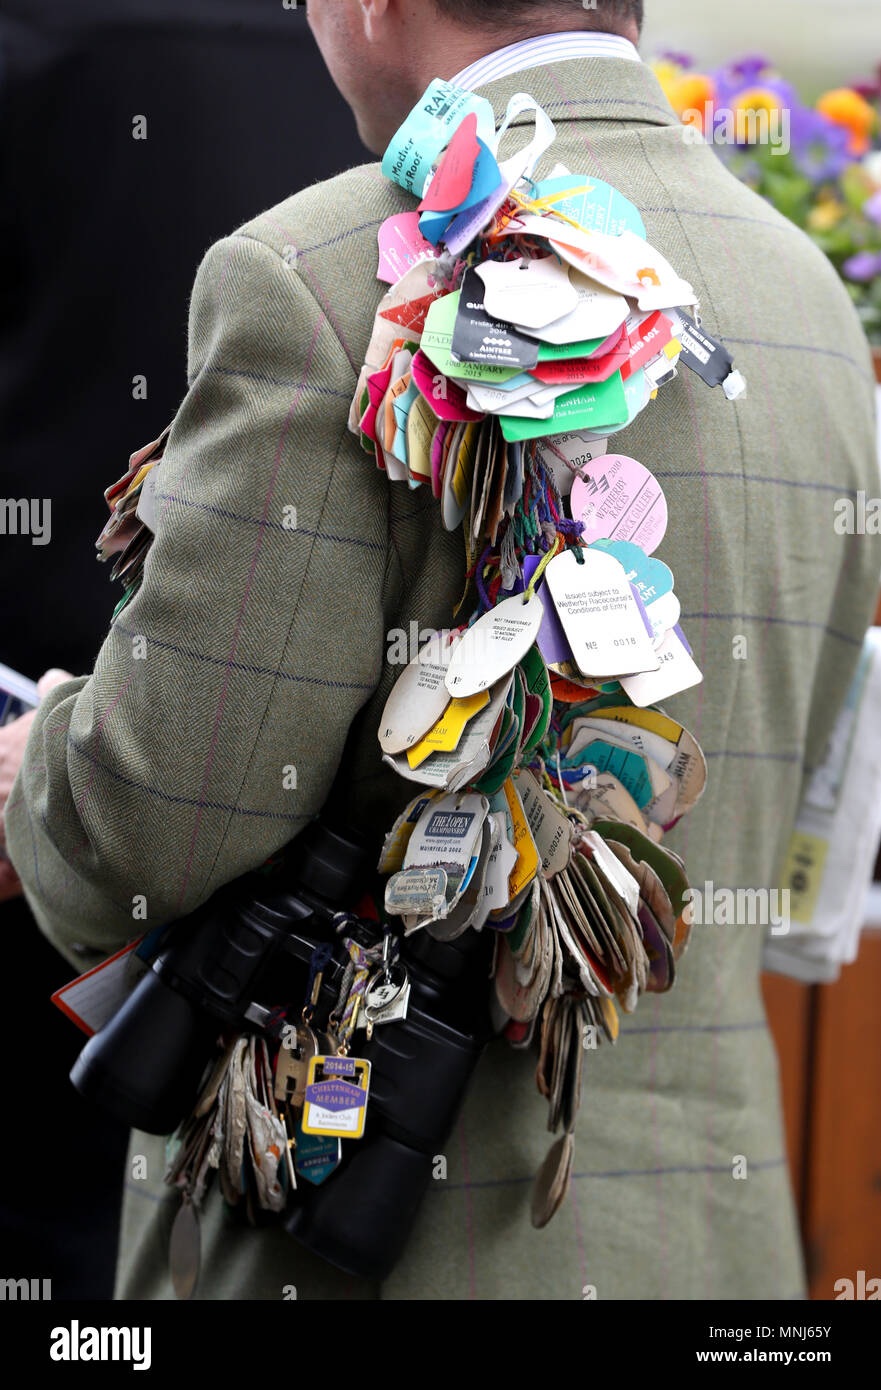 A racegoer shows off his previous passes day two of the 2018 Dante Festival at York Racecourse, York. Stock Photo